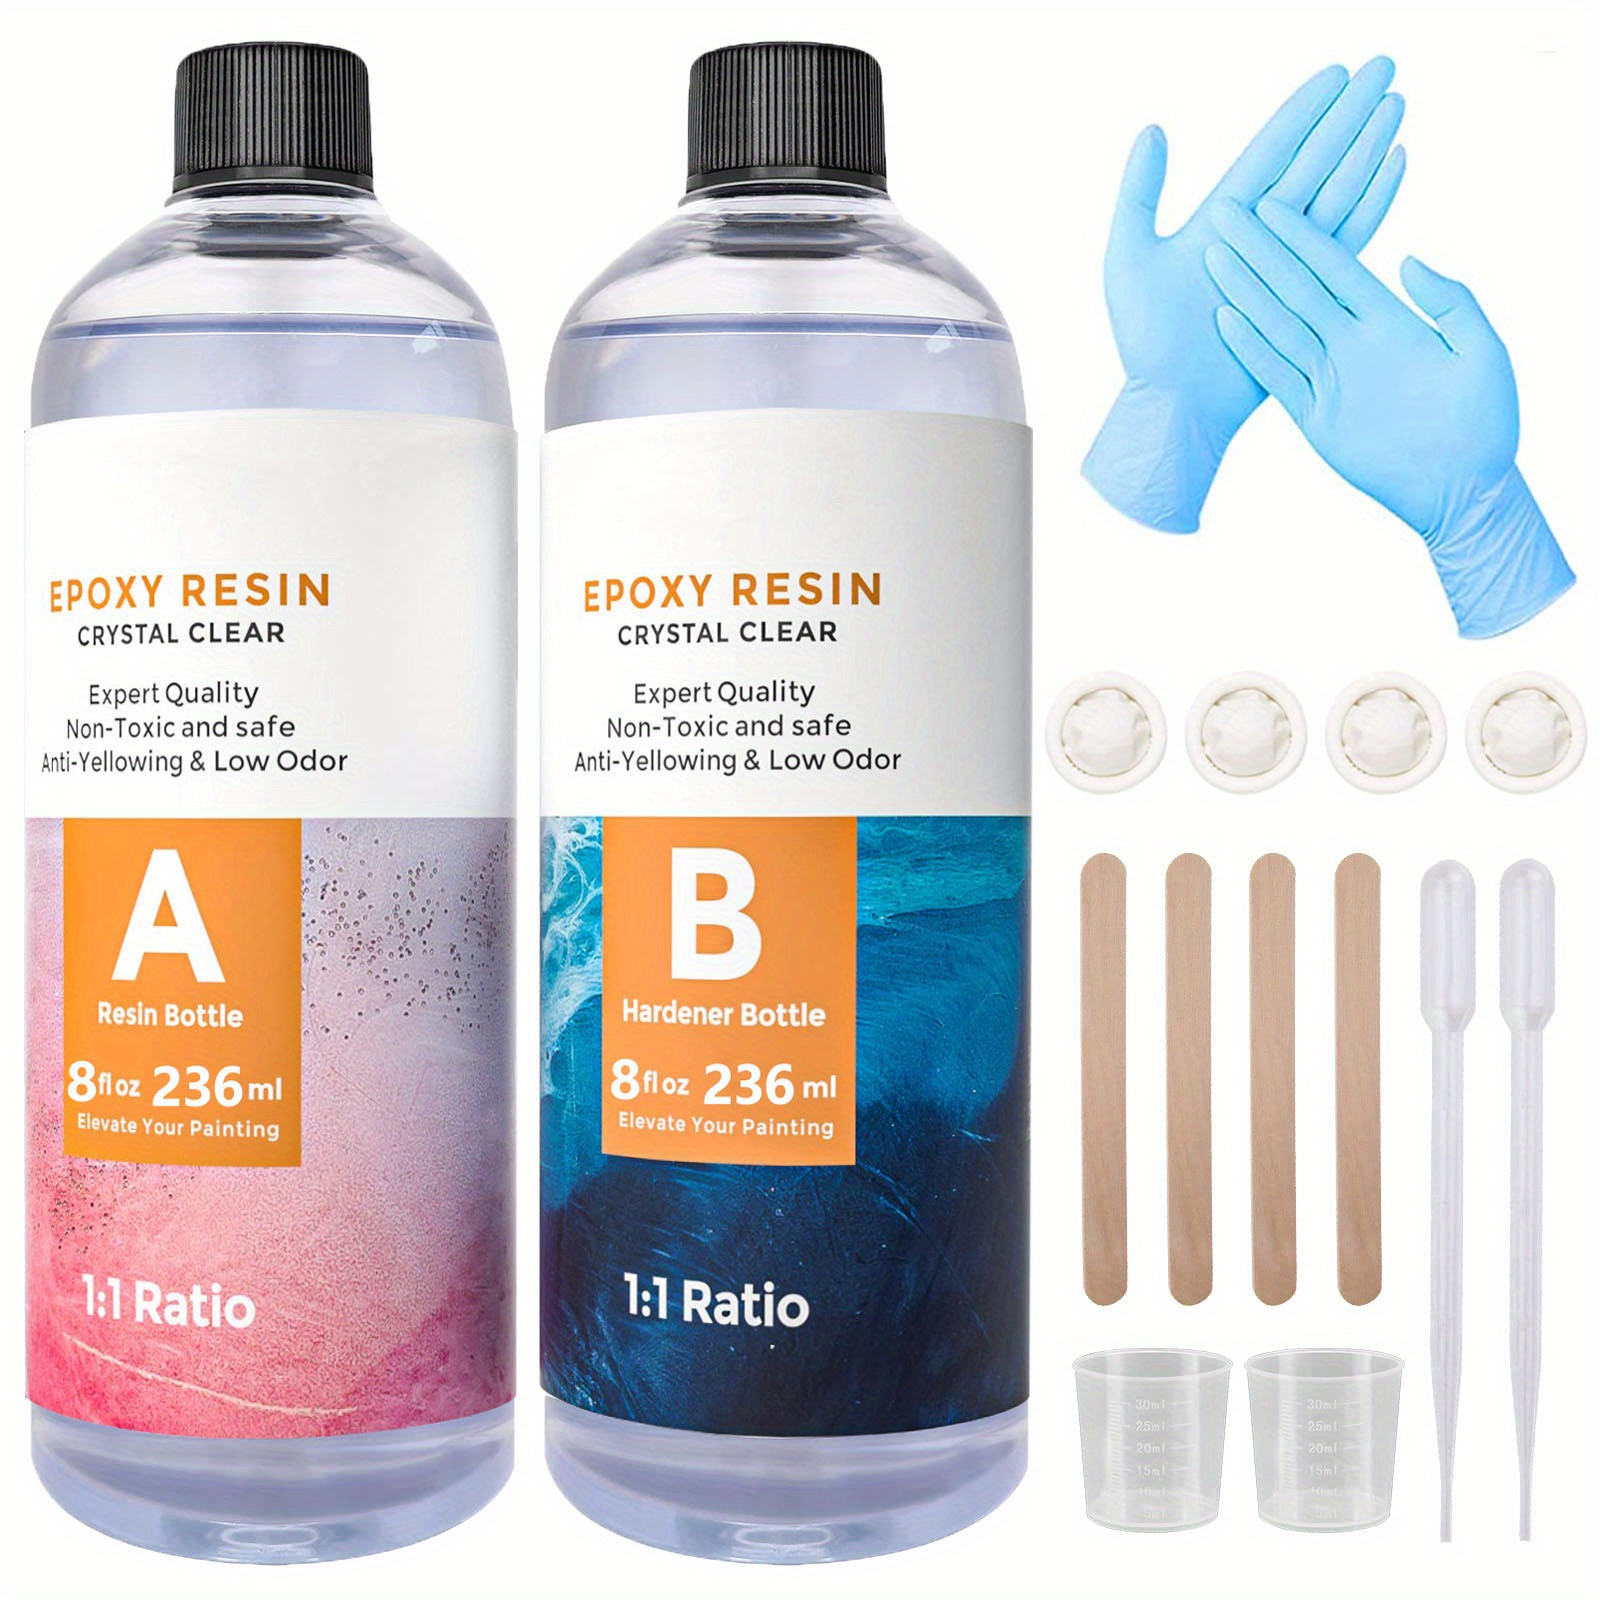 Art spiration Crystal Clear Epoxy Resin Kit for Beginners 16 oz, Art Epoxy Resin Kit with Mica Powder, Resin Pigment, Silicone Molds, Crushed Glass, R